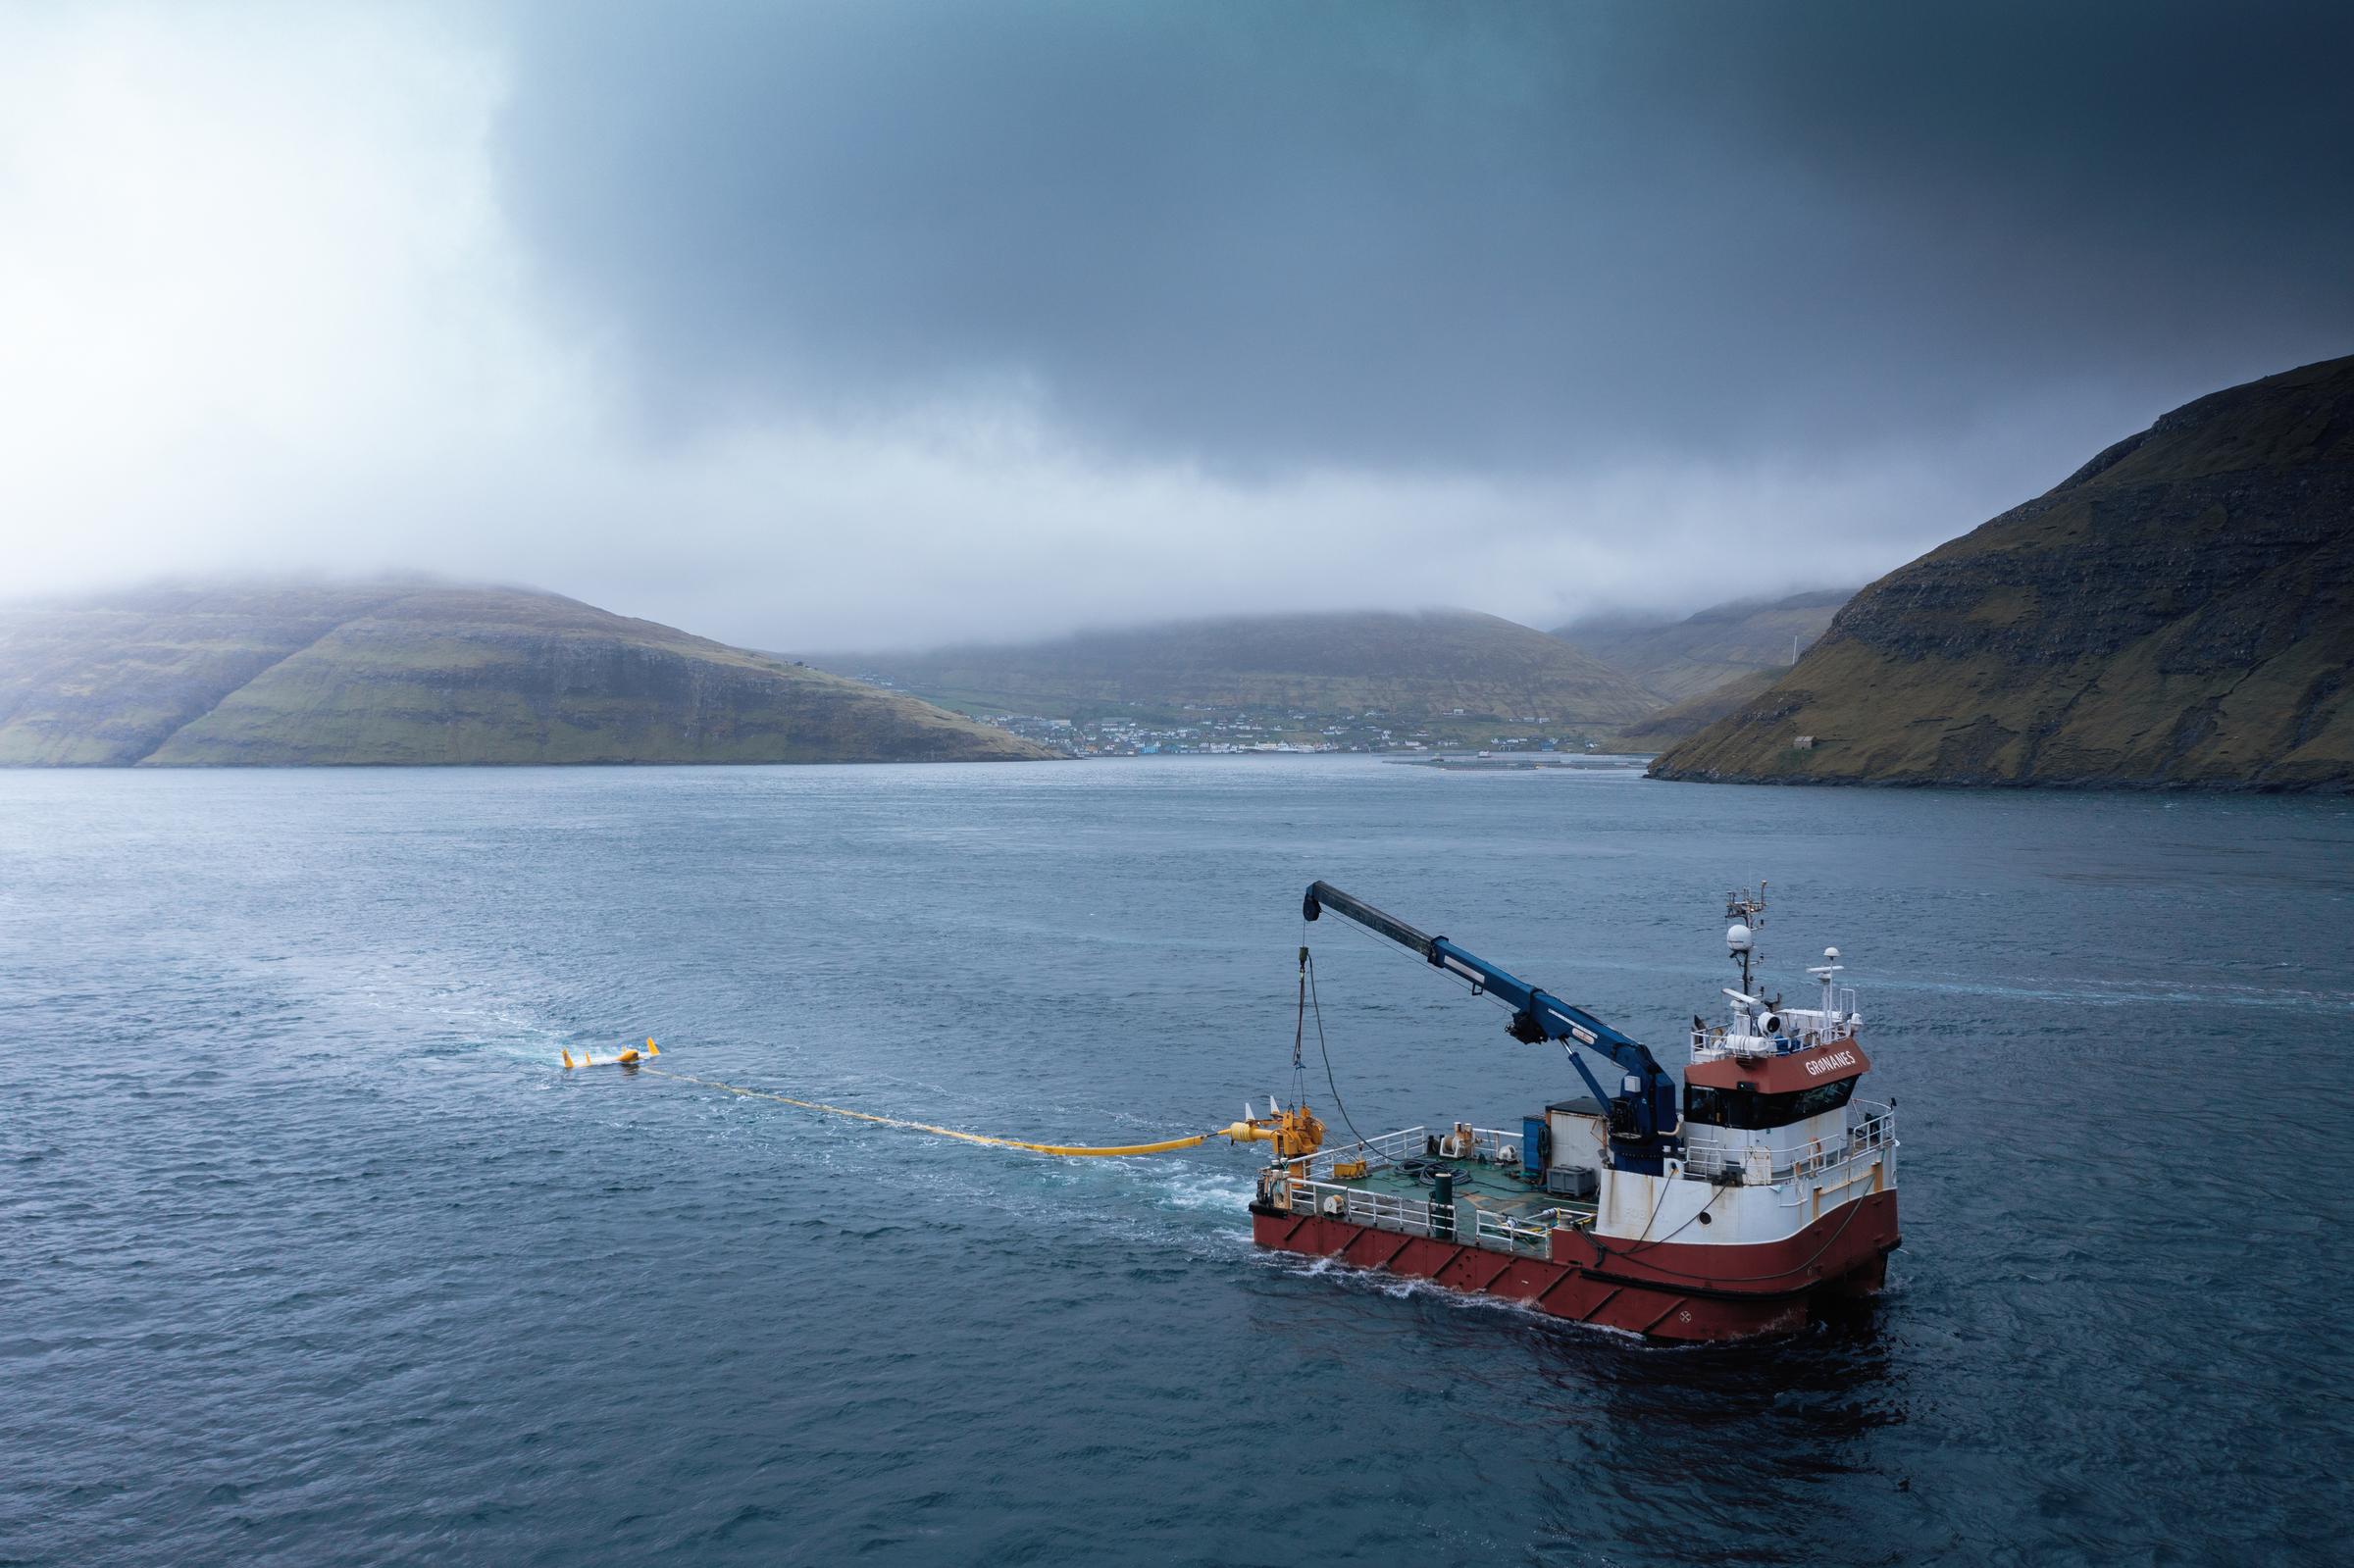 Marine energy technology company Minesto has inked a collaborative agreement with Hydrokite Project Development, an ocean current and tidal energy project developer, to bring its technology to markets in Australia and New Zealand.